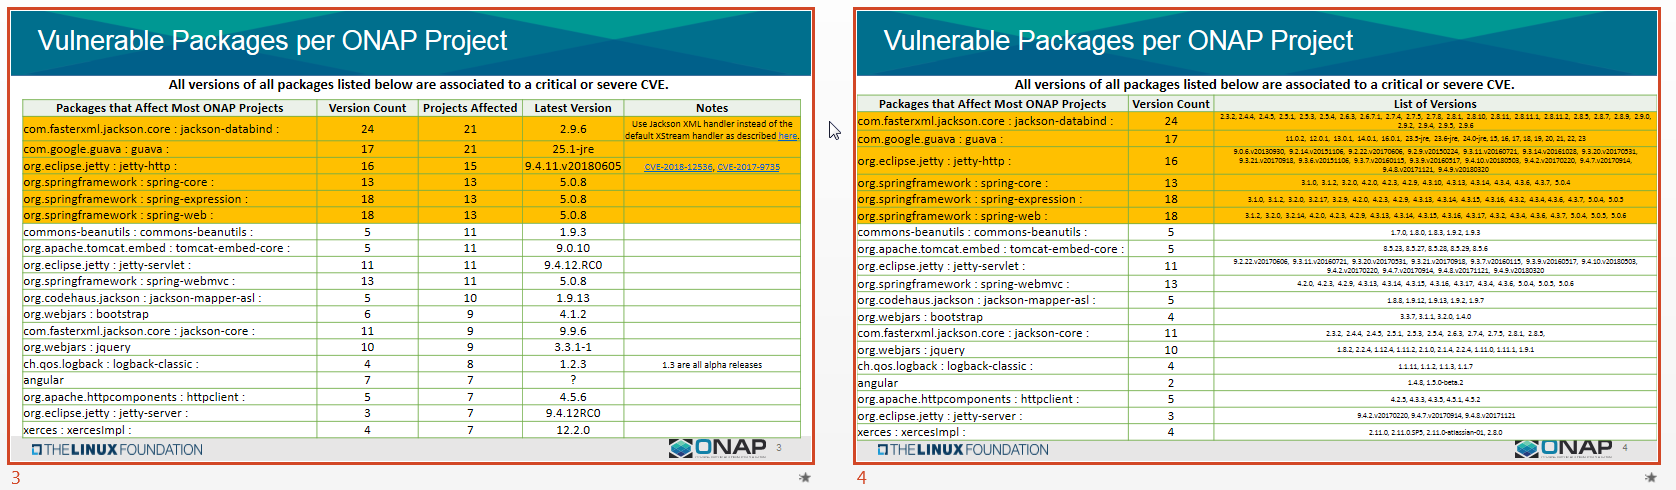 Vulnerable Packages per ONAP project